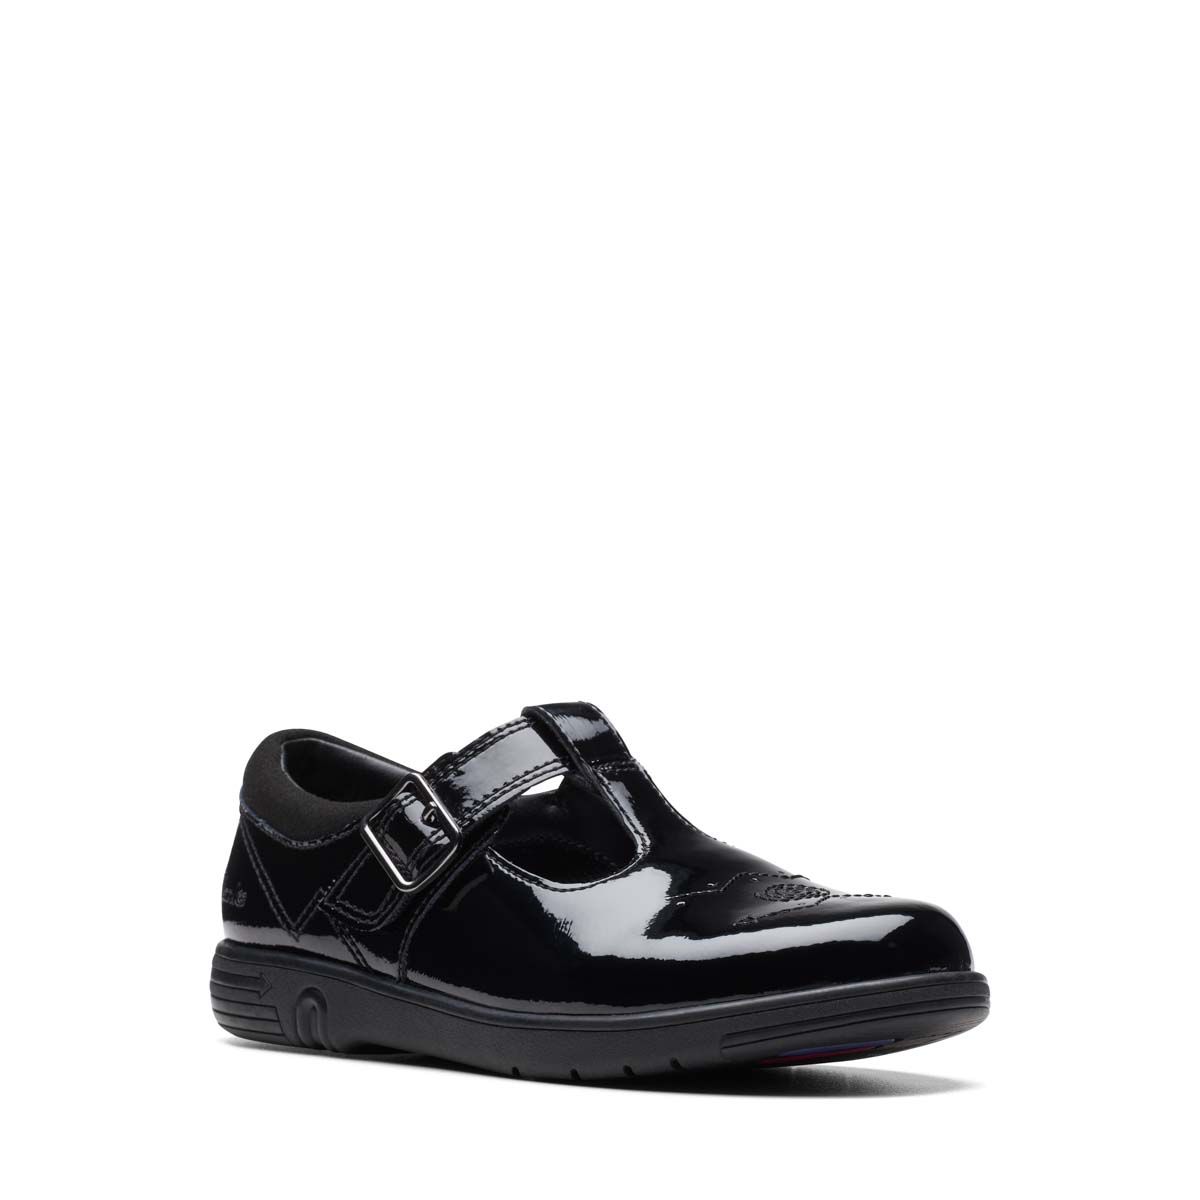 Clarks Jazzy Tap T Bar Black Patent Kids Girls School Shoes 753076F In Size 12.5 In Plain Black Patent F Width Fitting Regular Fit For School For kids